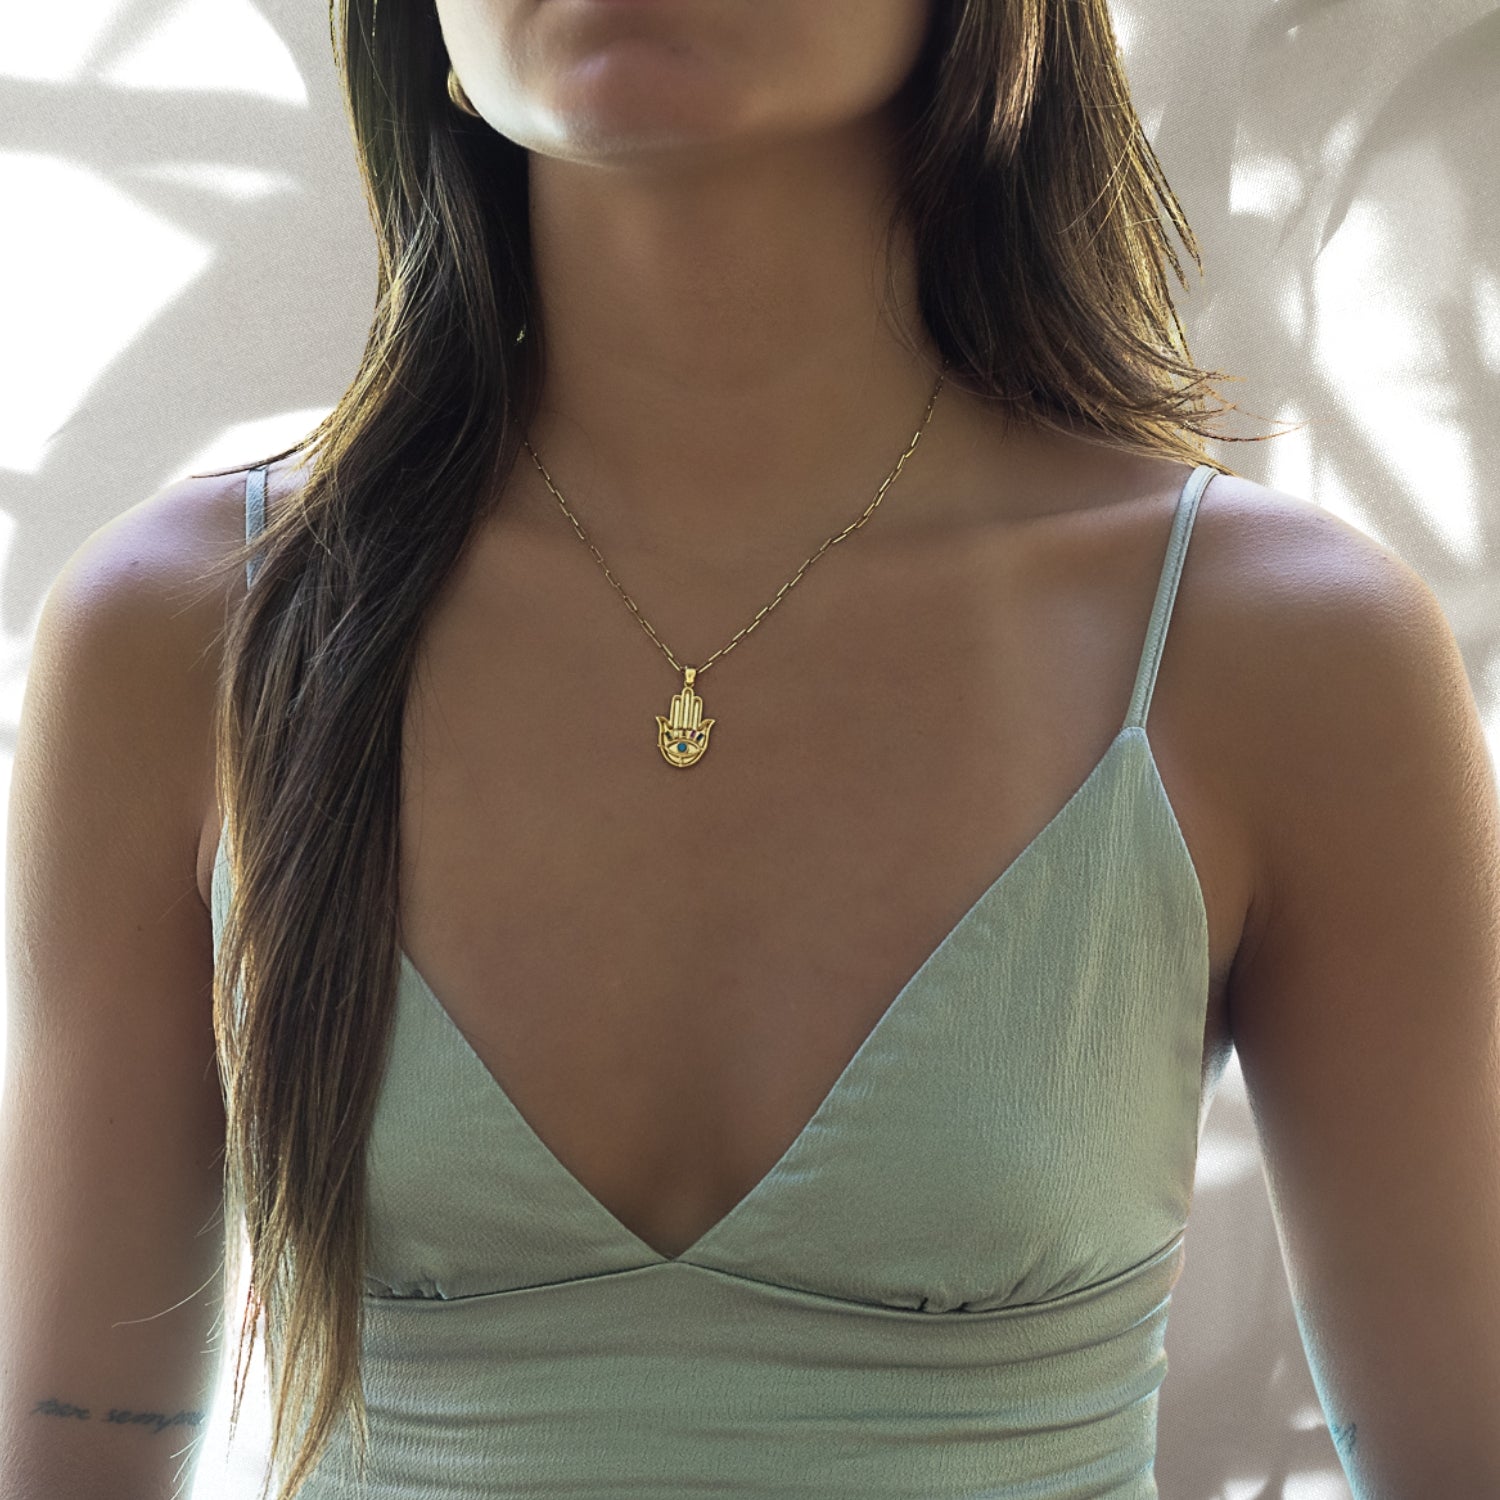 Model Wearing Hamsa Talisman Necklace - See how this stunning gold necklace with a turquoise Hamsa pendant enhances the style and brings a touch of spirituality to any outfit.